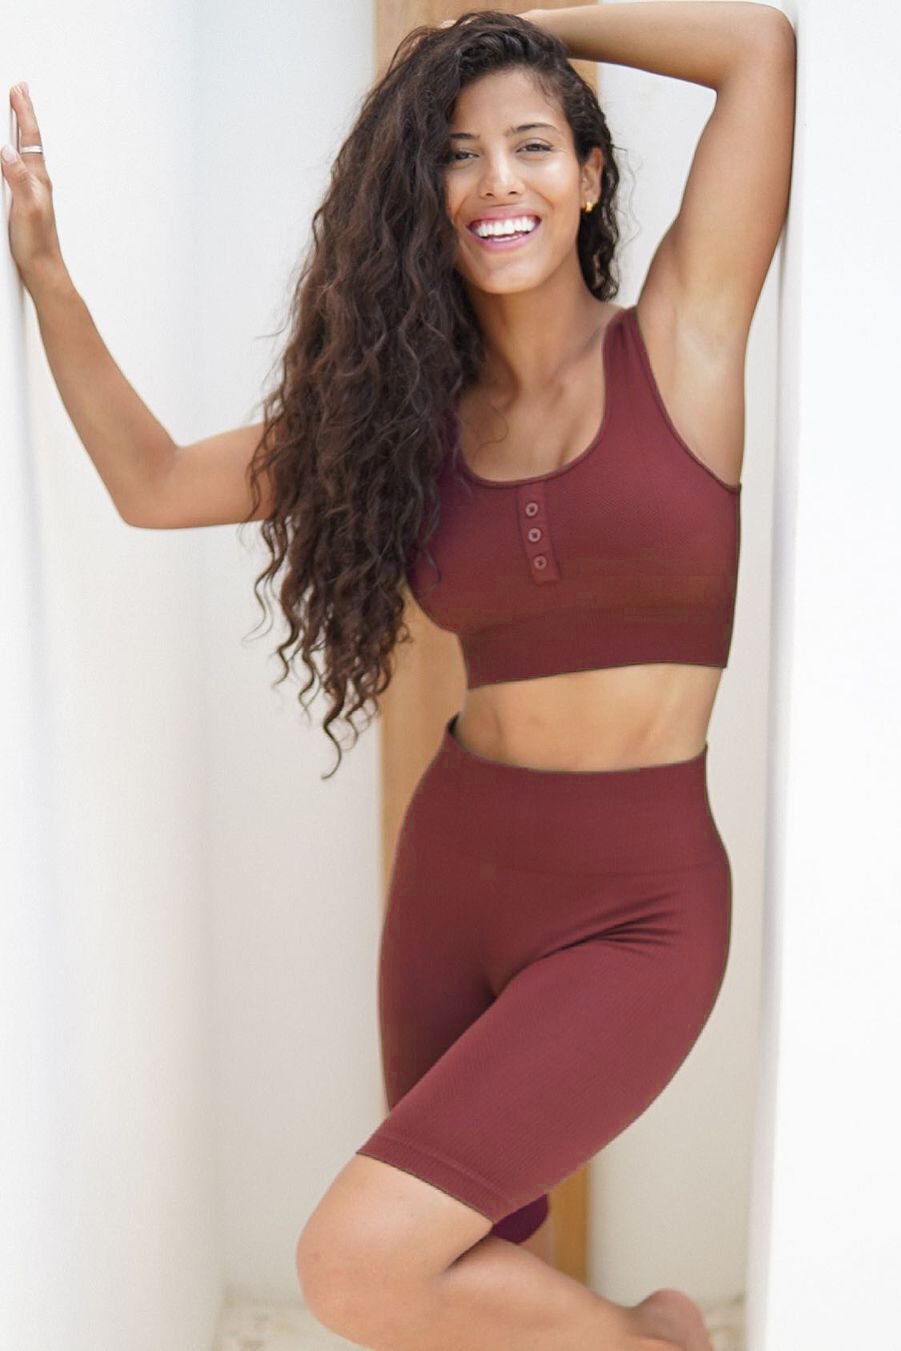 Ribbed Button Detailing Sports Bra - Maroon Sports Bra Jed North 